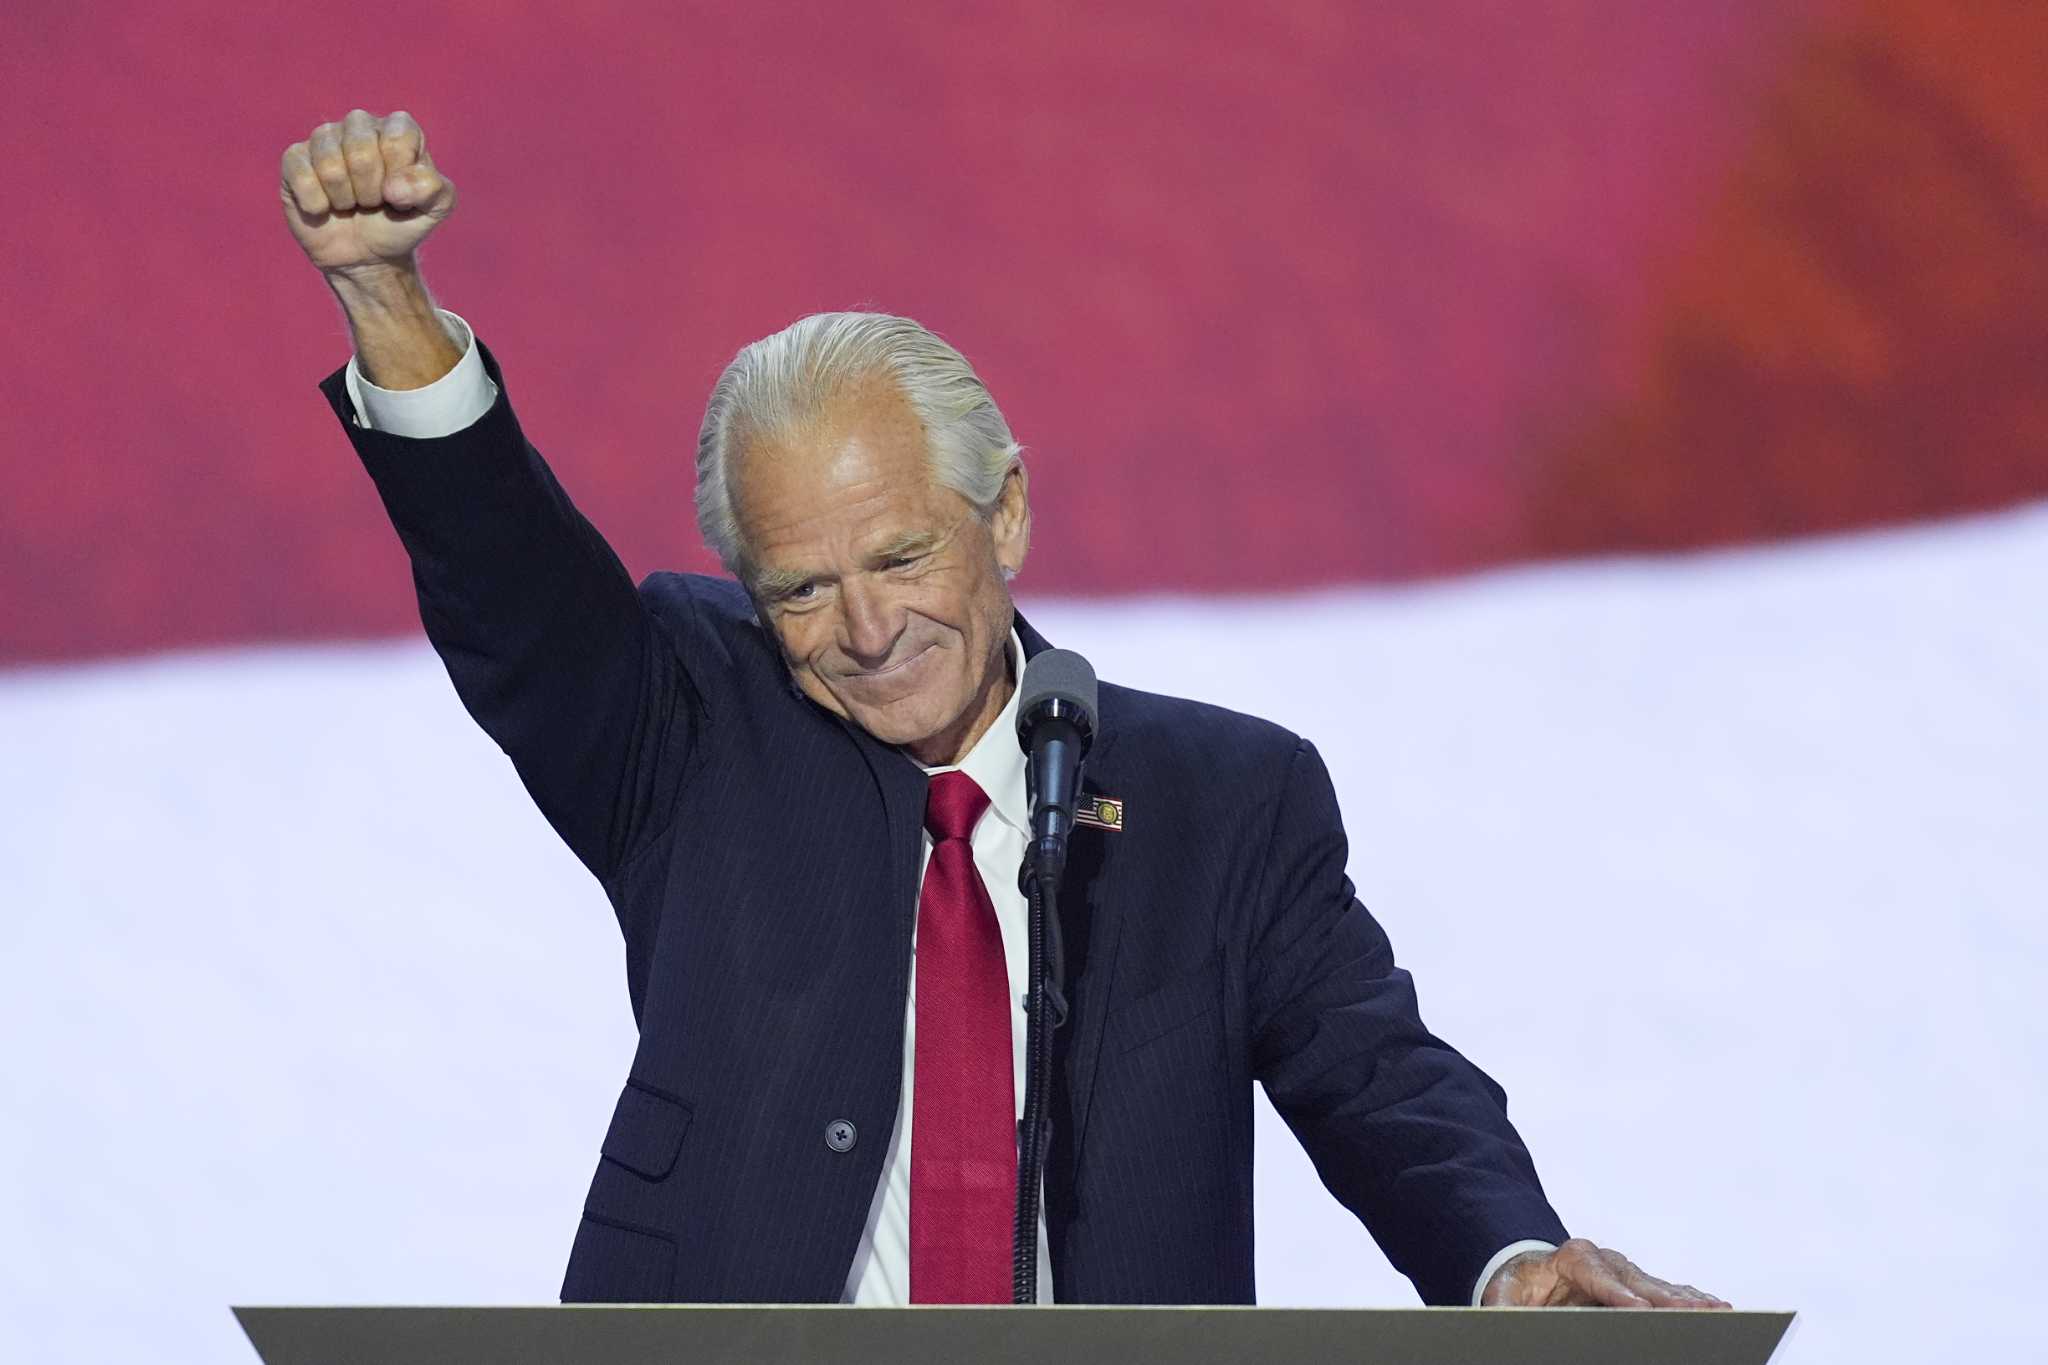 Ex-Trump adviser Peter Navarro, just released from prison, gets roaring applause at RNC